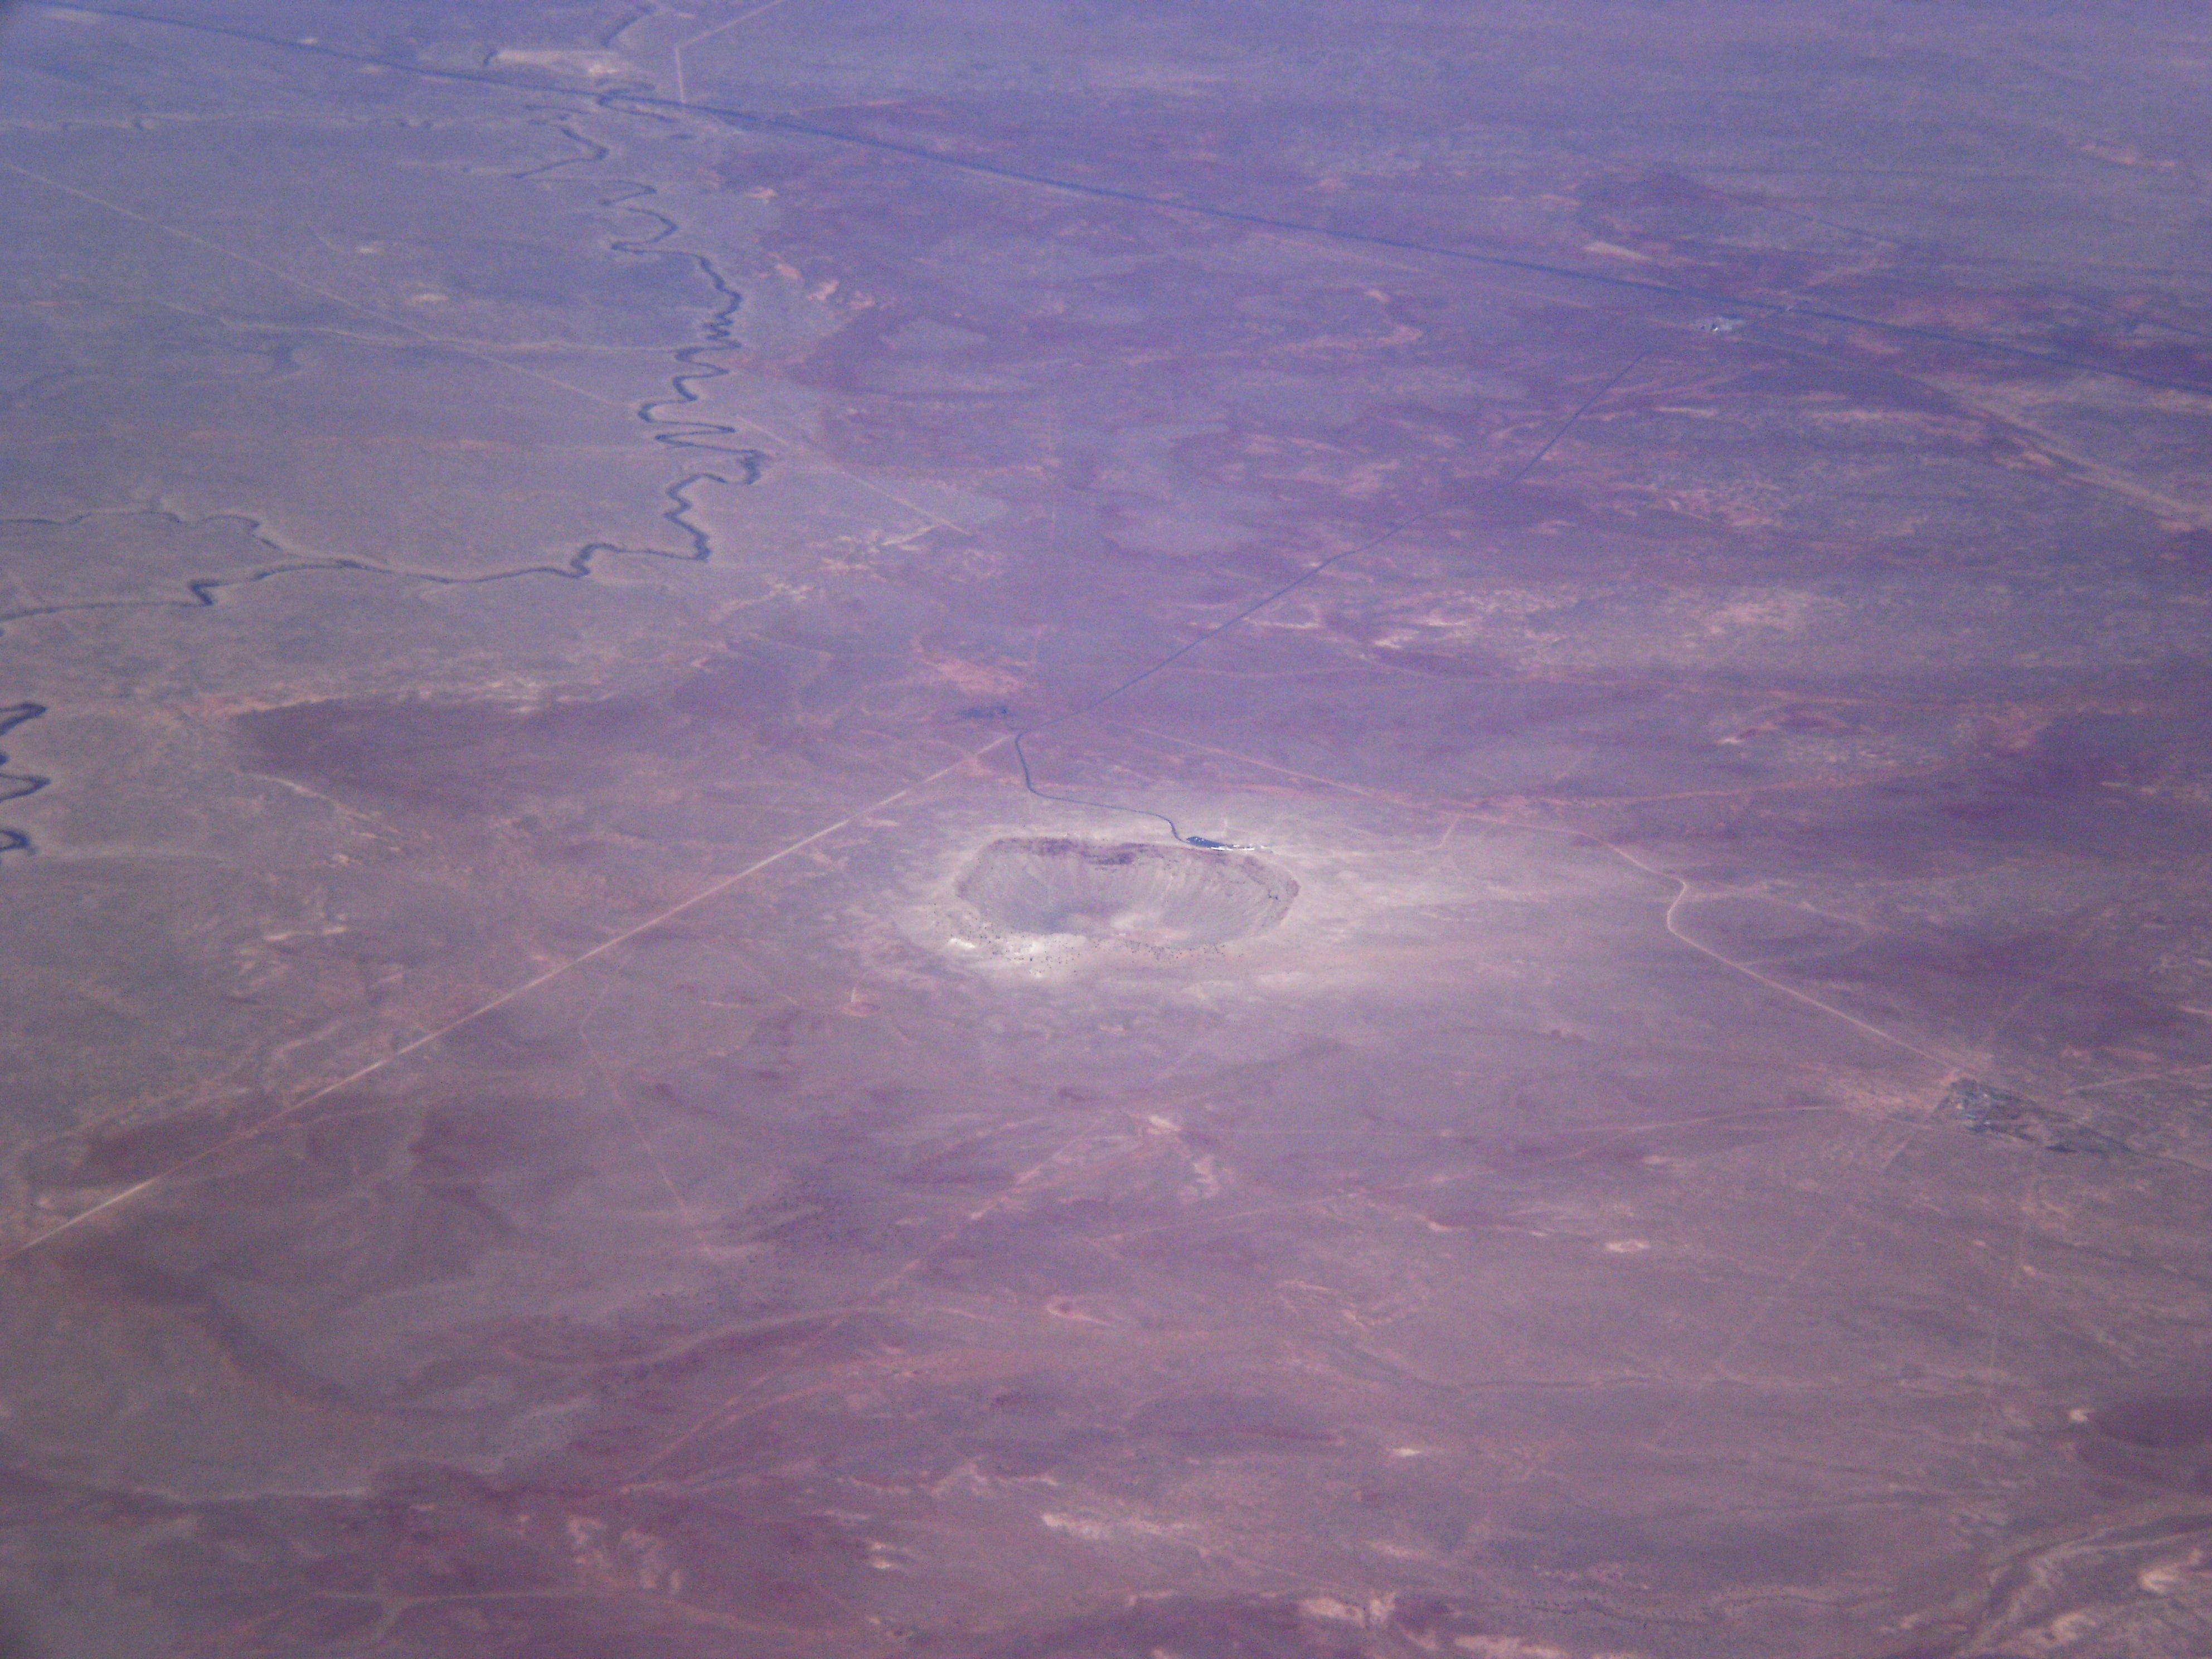 Meteor Crater, AZ from 35,000 ft